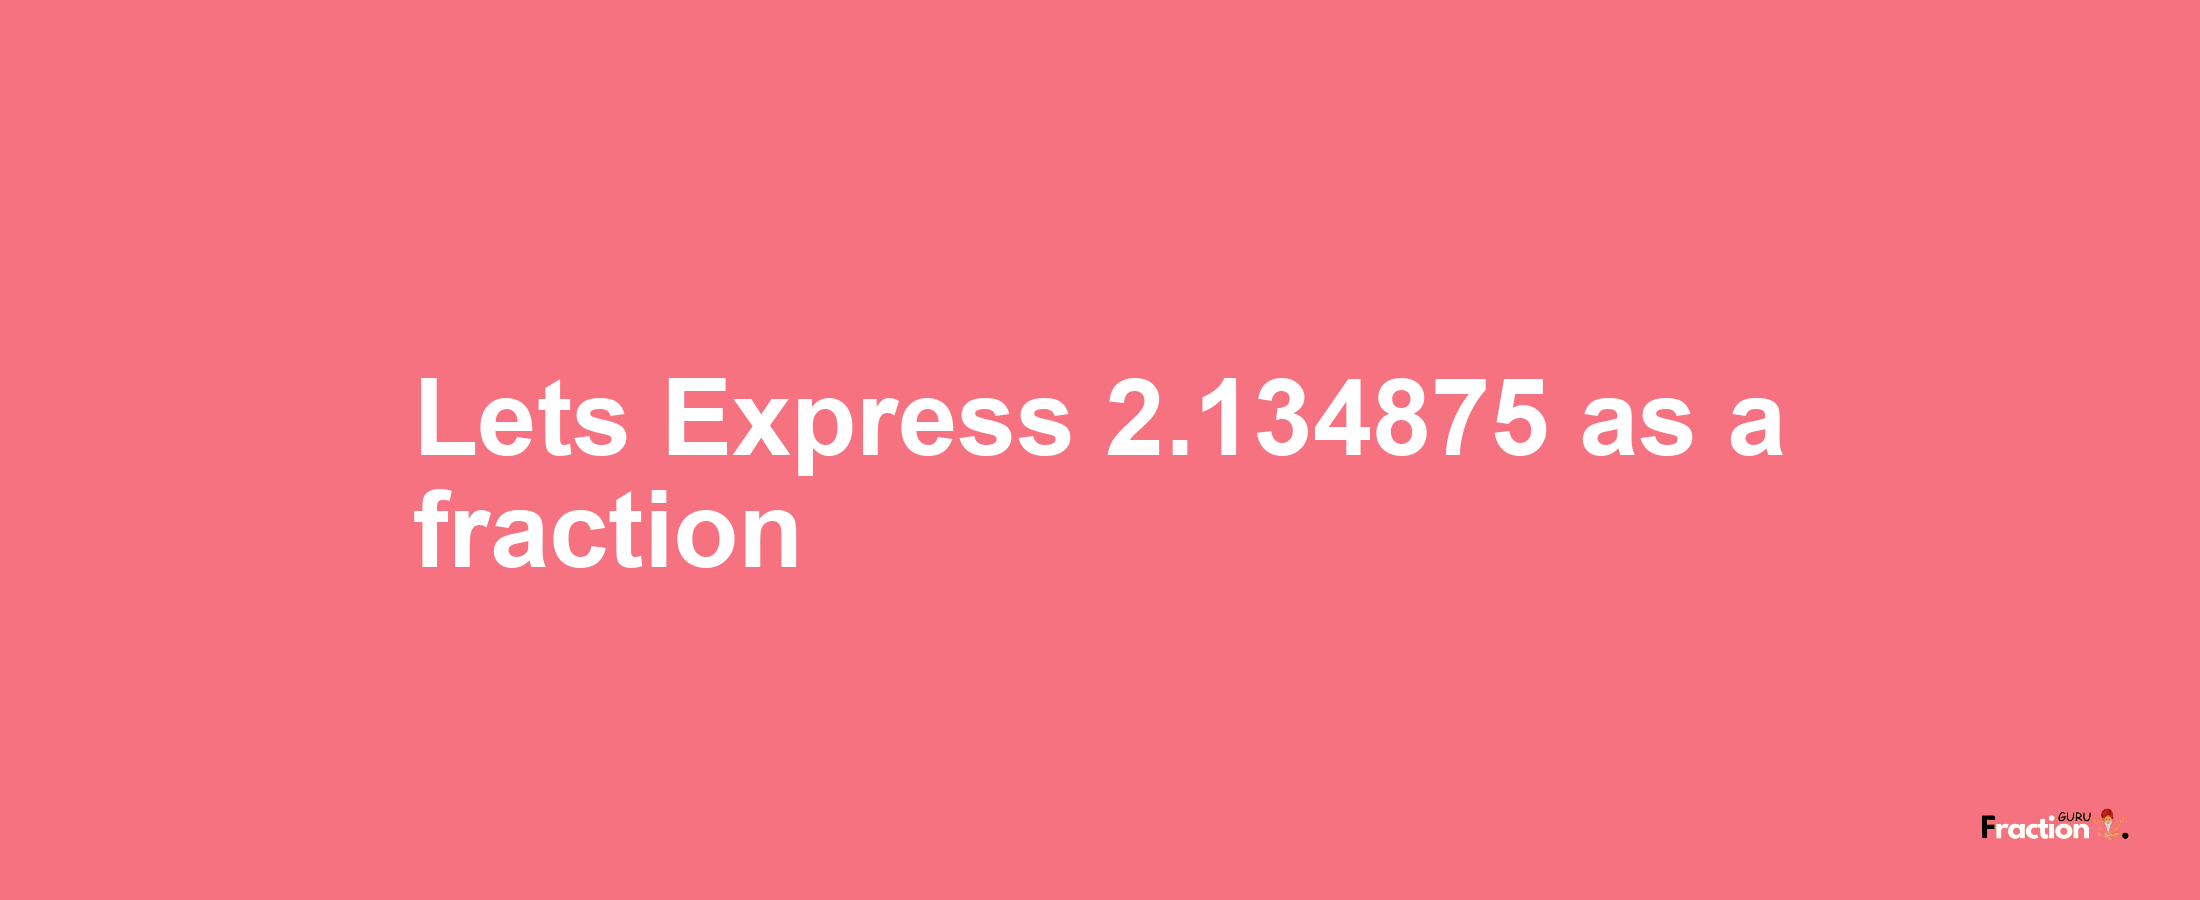 Lets Express 2.134875 as afraction